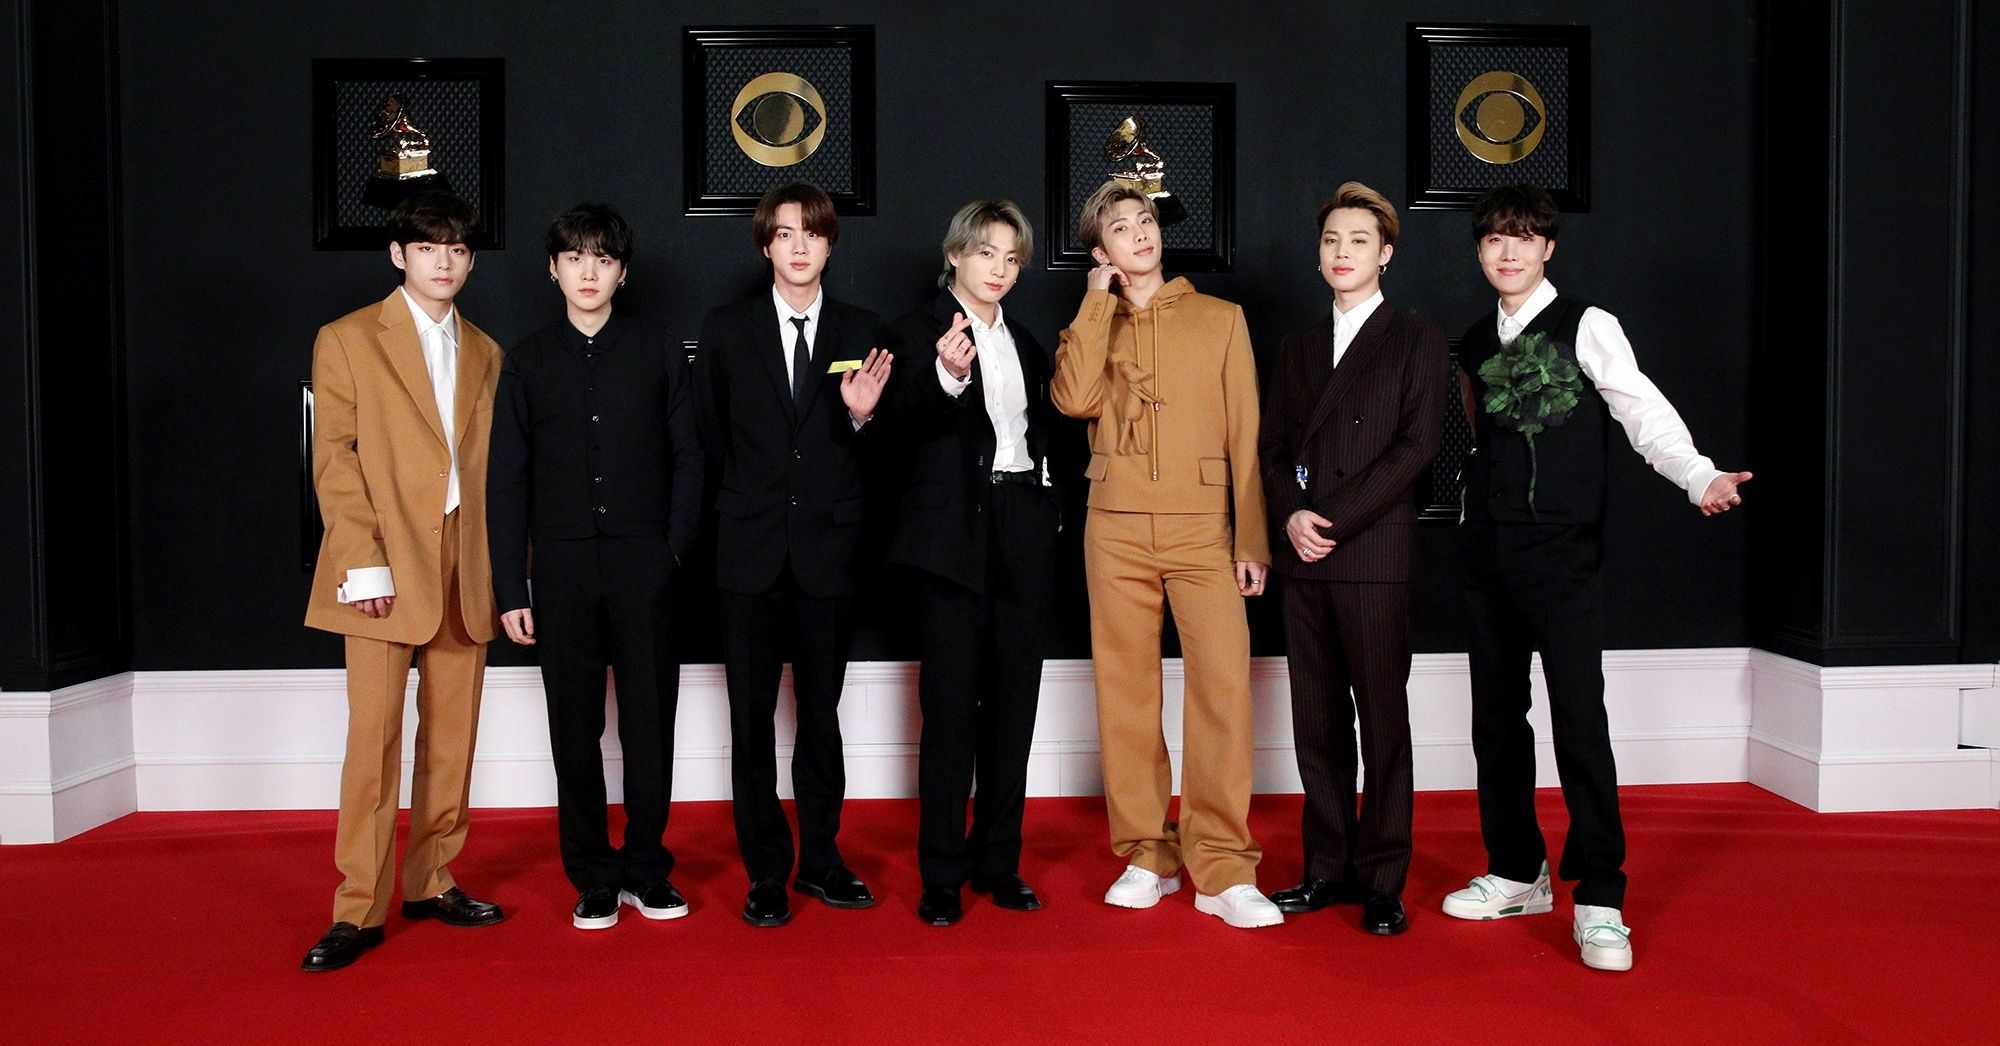 BTS were the real winners of the 2021 Grammys red carpet